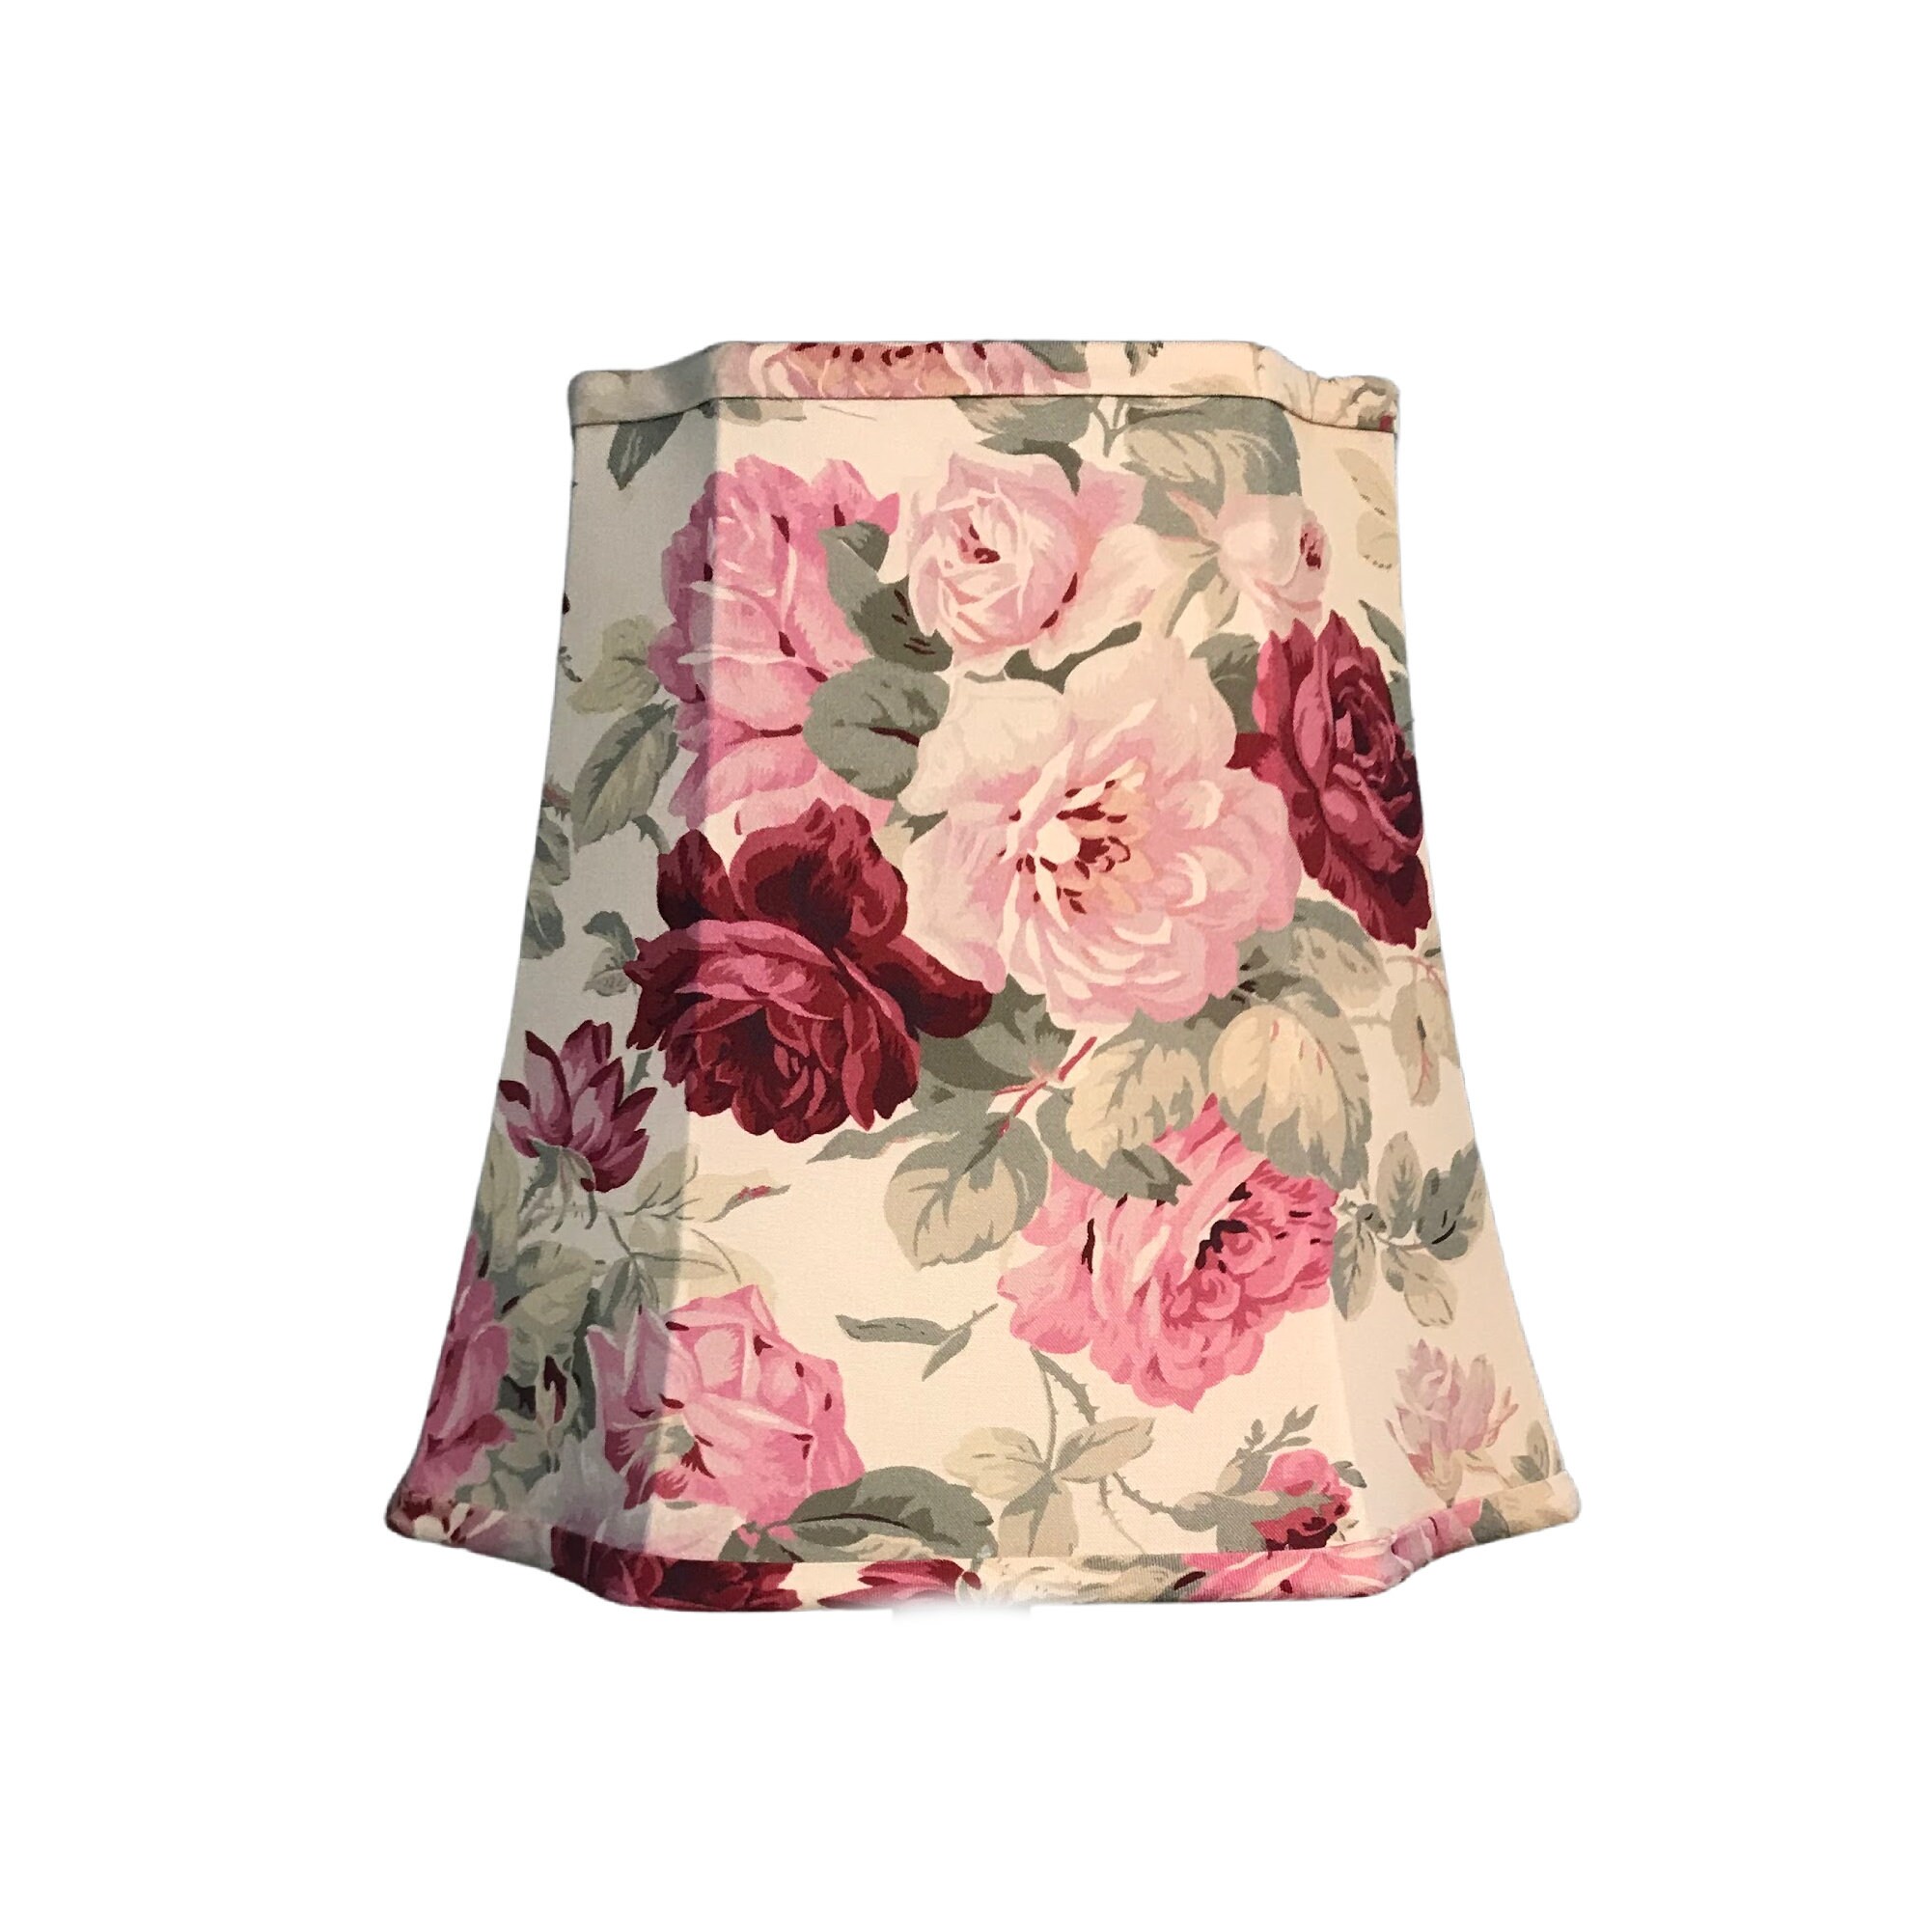 Vintage Rose Lampshade,floral wood shabby chic,light shade,pastels FREE GIFT 